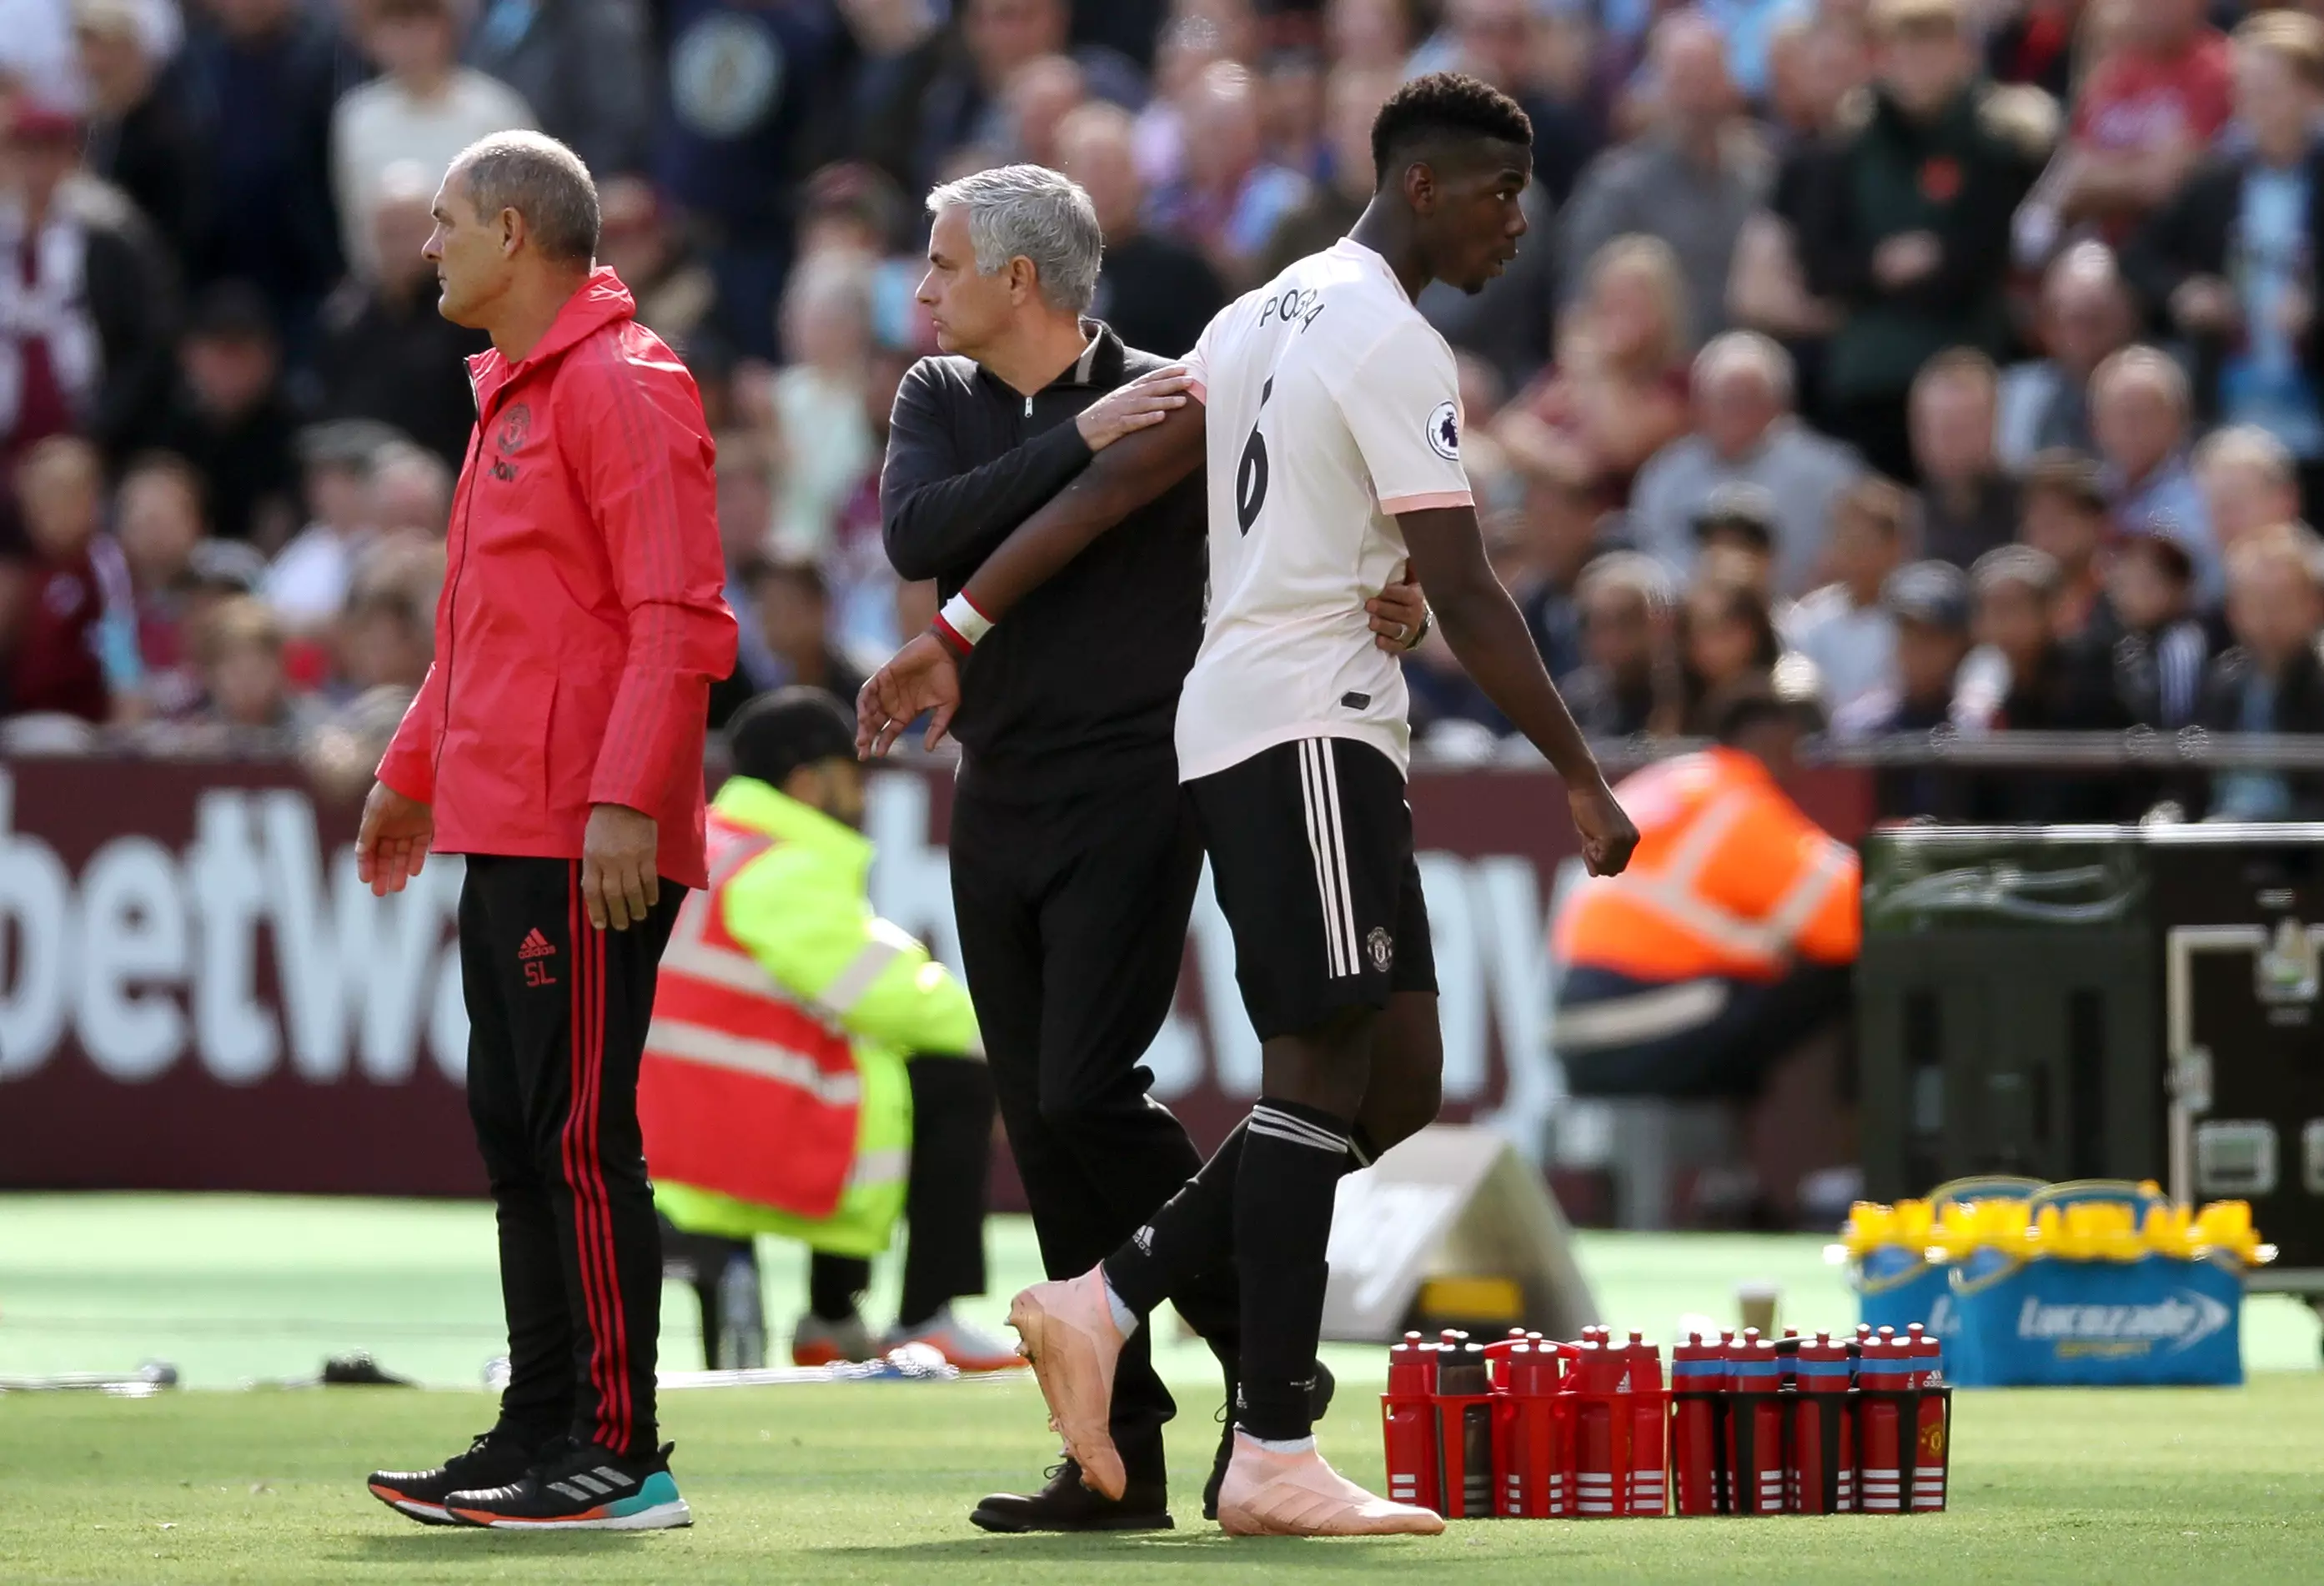 Pogba was once again subbed off during the West Ham game. Image: PA Images